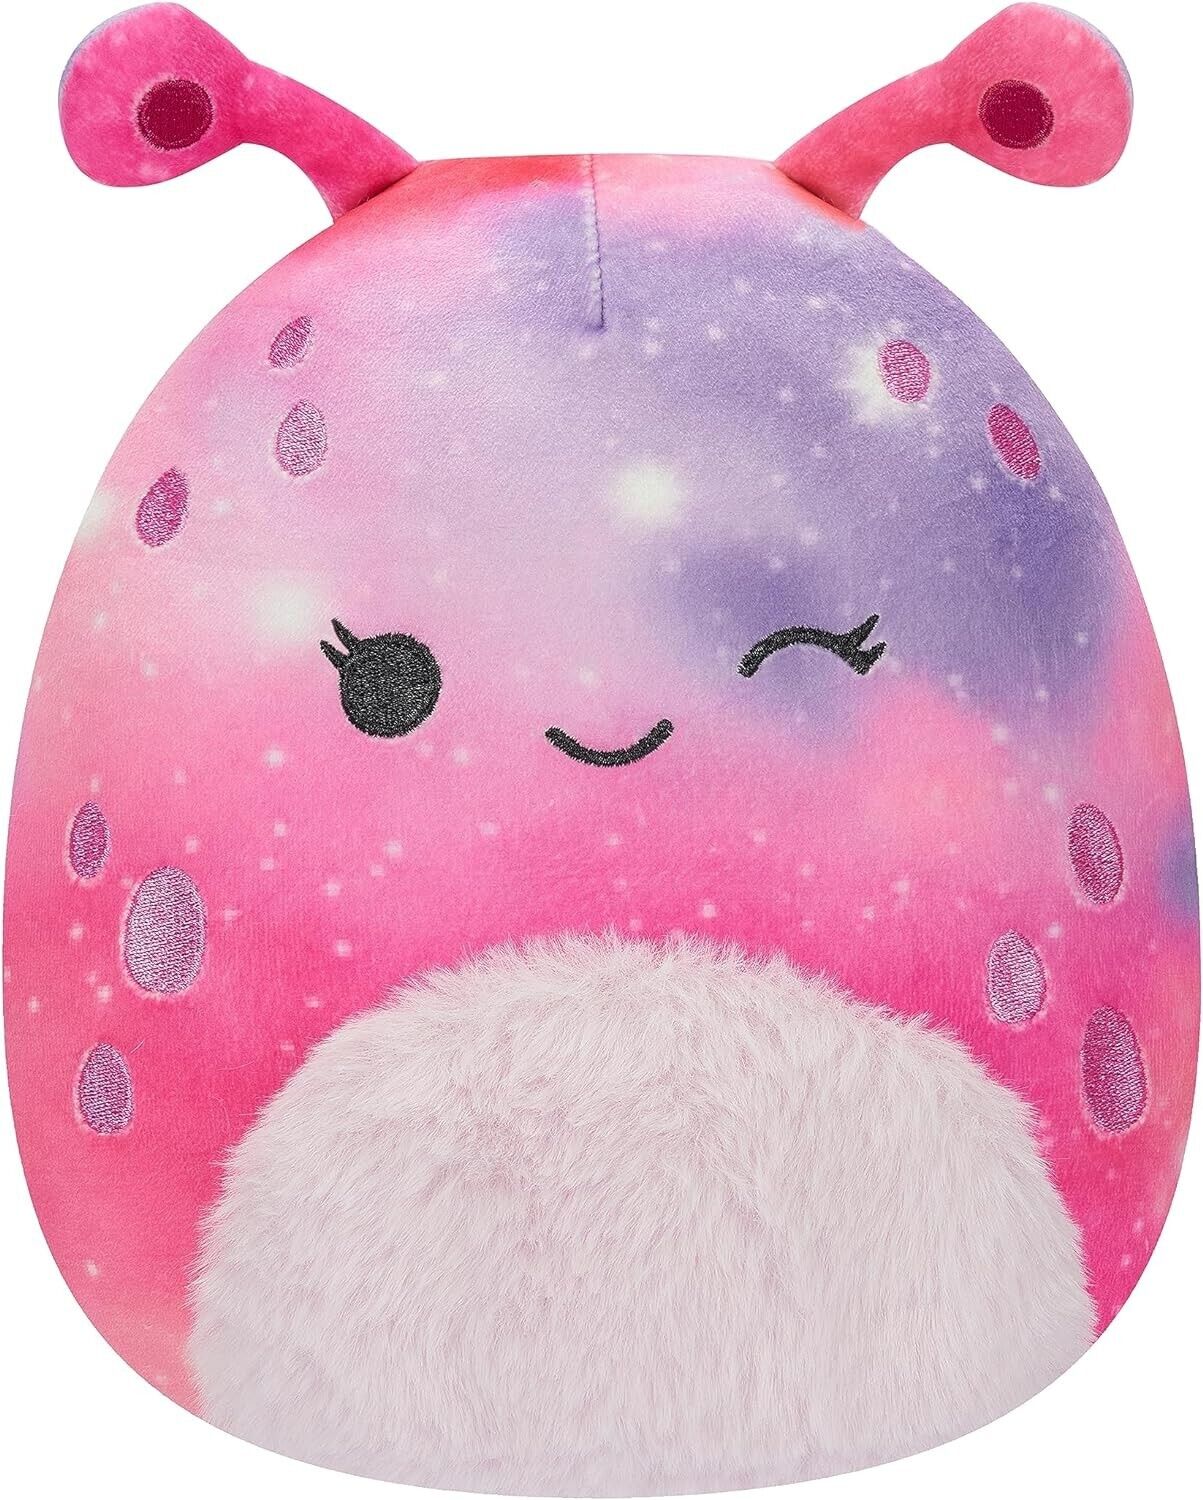 Squishmallows Original 7.5-Inch Loraly the Winking Pink and Purple Alien Small-S